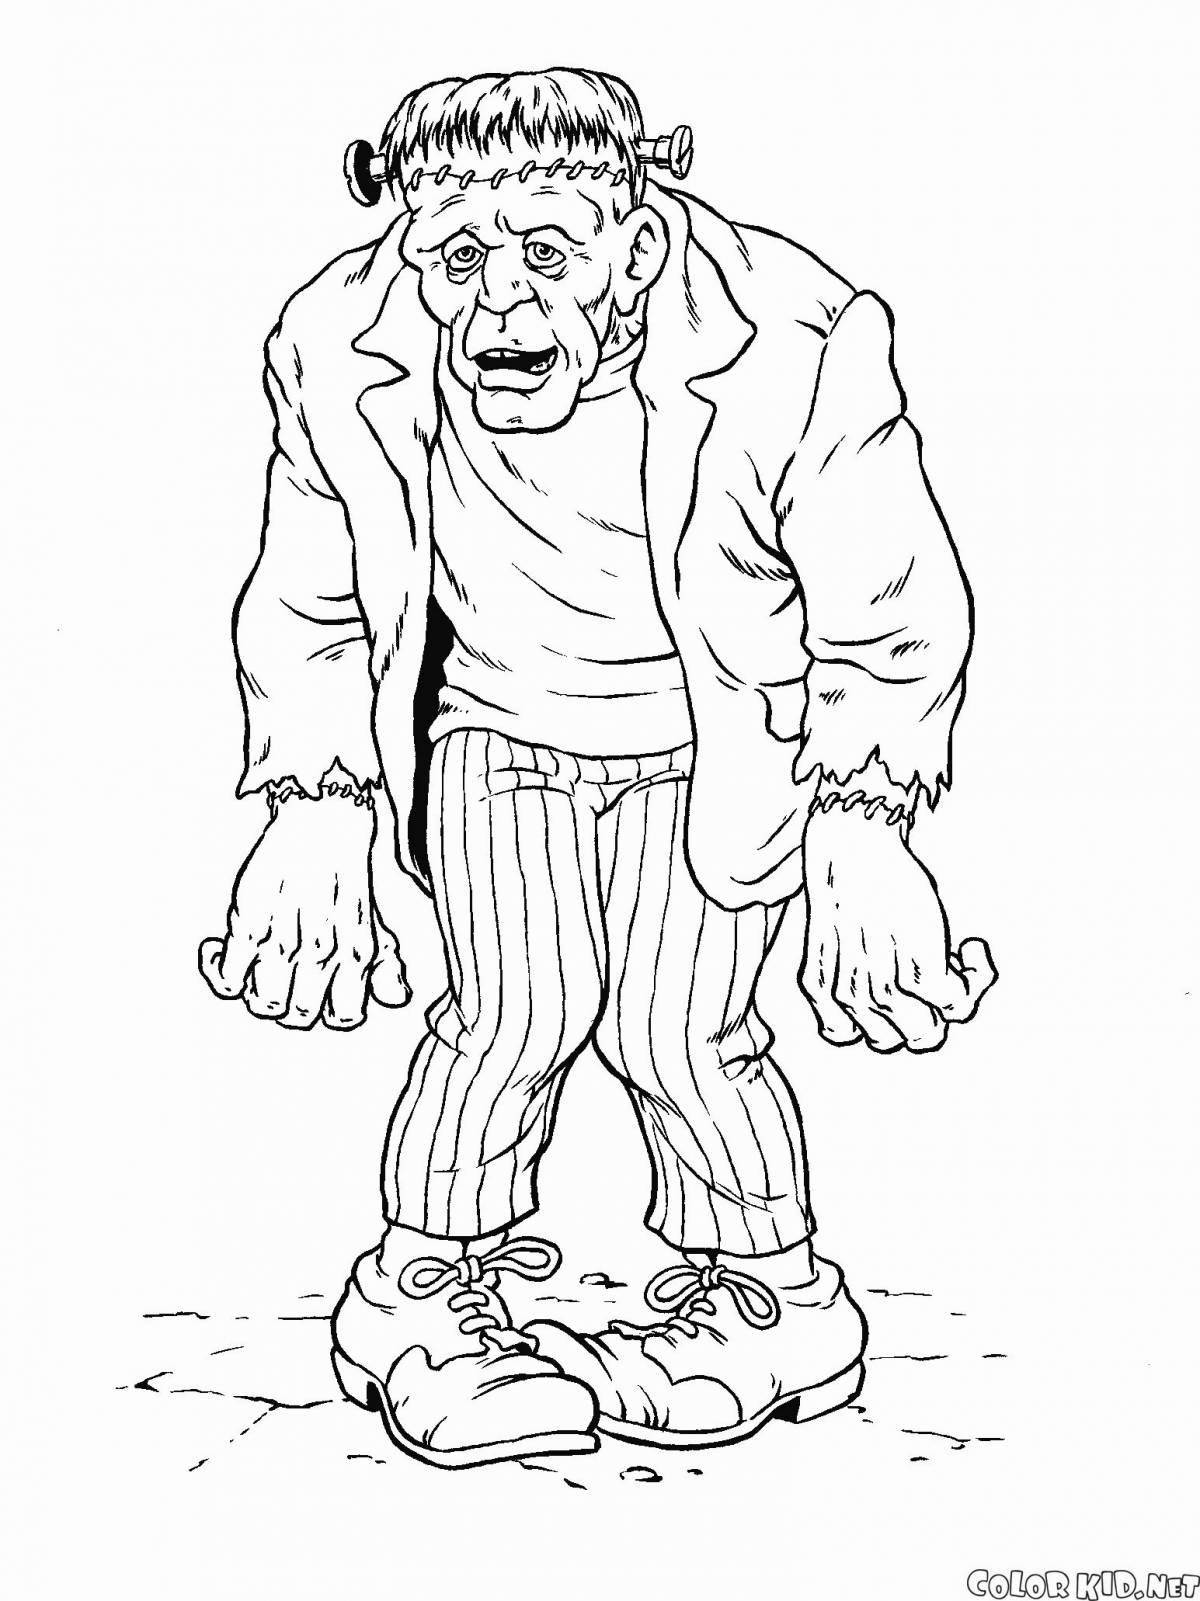 Frightening Frankenstein Coloring Page